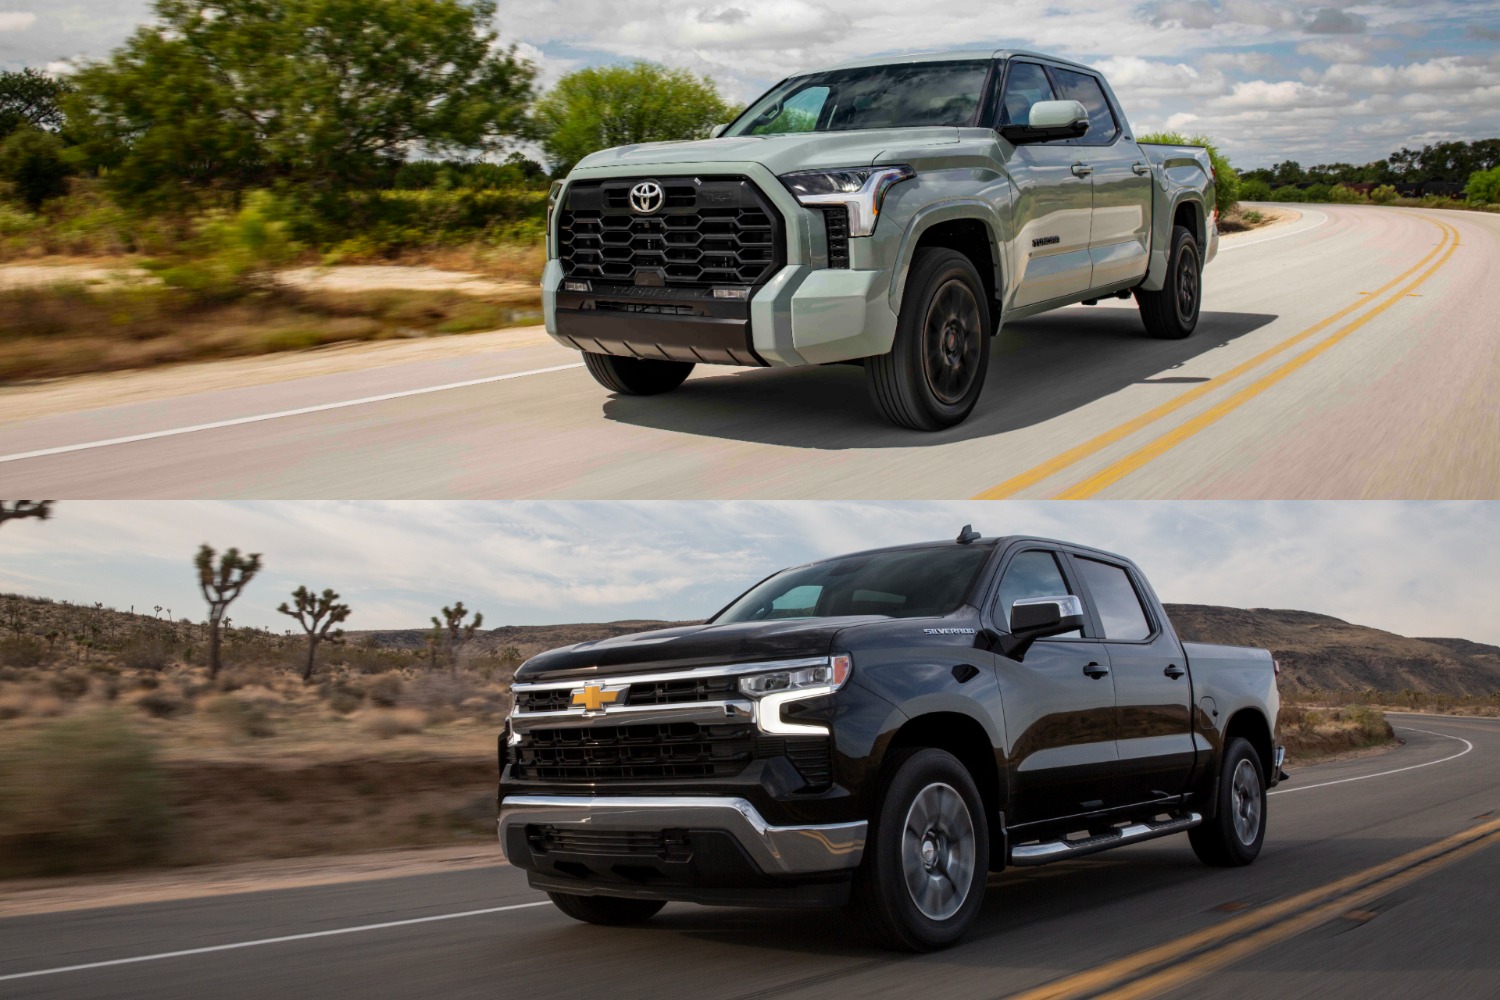 Is the Toyota Tundra more reliable than the Chevy Silverado?